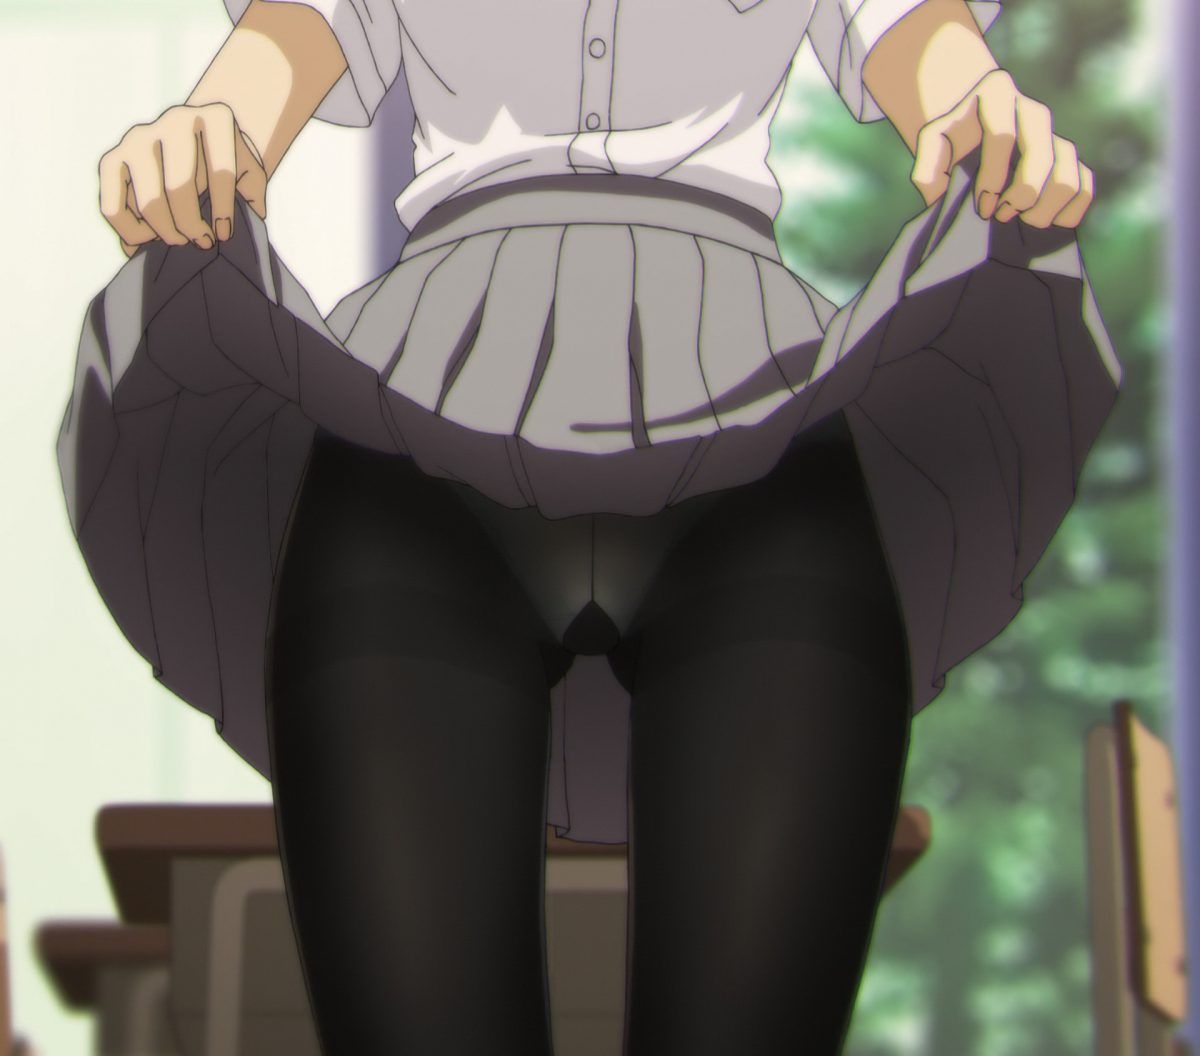 Happy Tights Day from Japan! Why Are Stockings So Great? J-List Blog photo